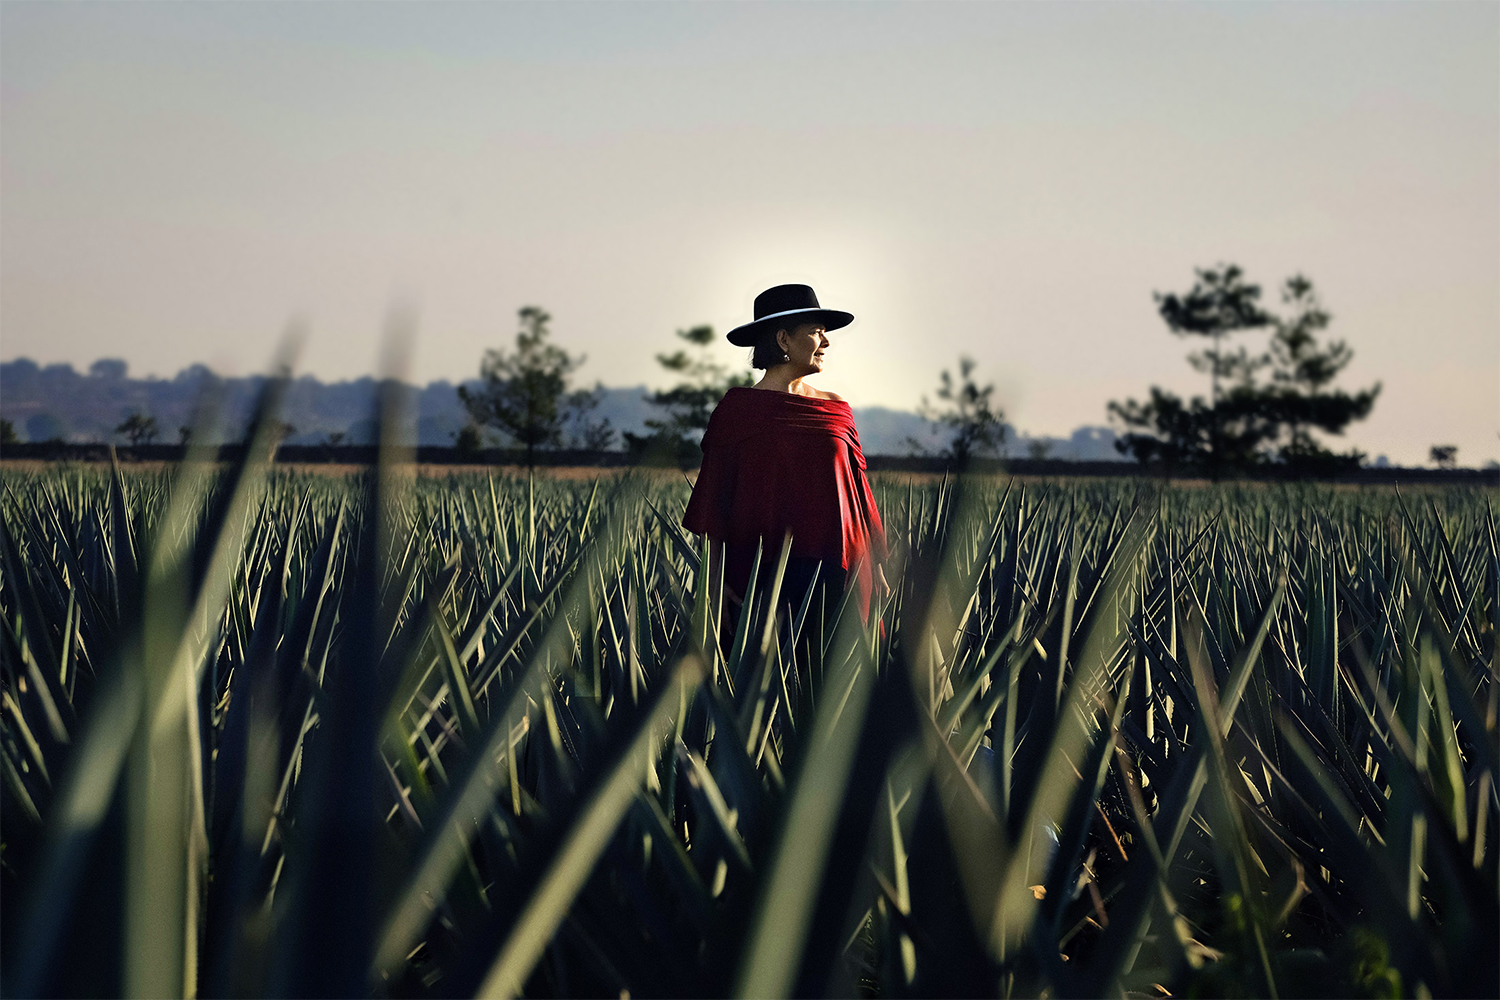 Ana Maria Romero Mena, the Maestra Tequilera behind the tequila brand Mijenta, stands in a field of agave plants